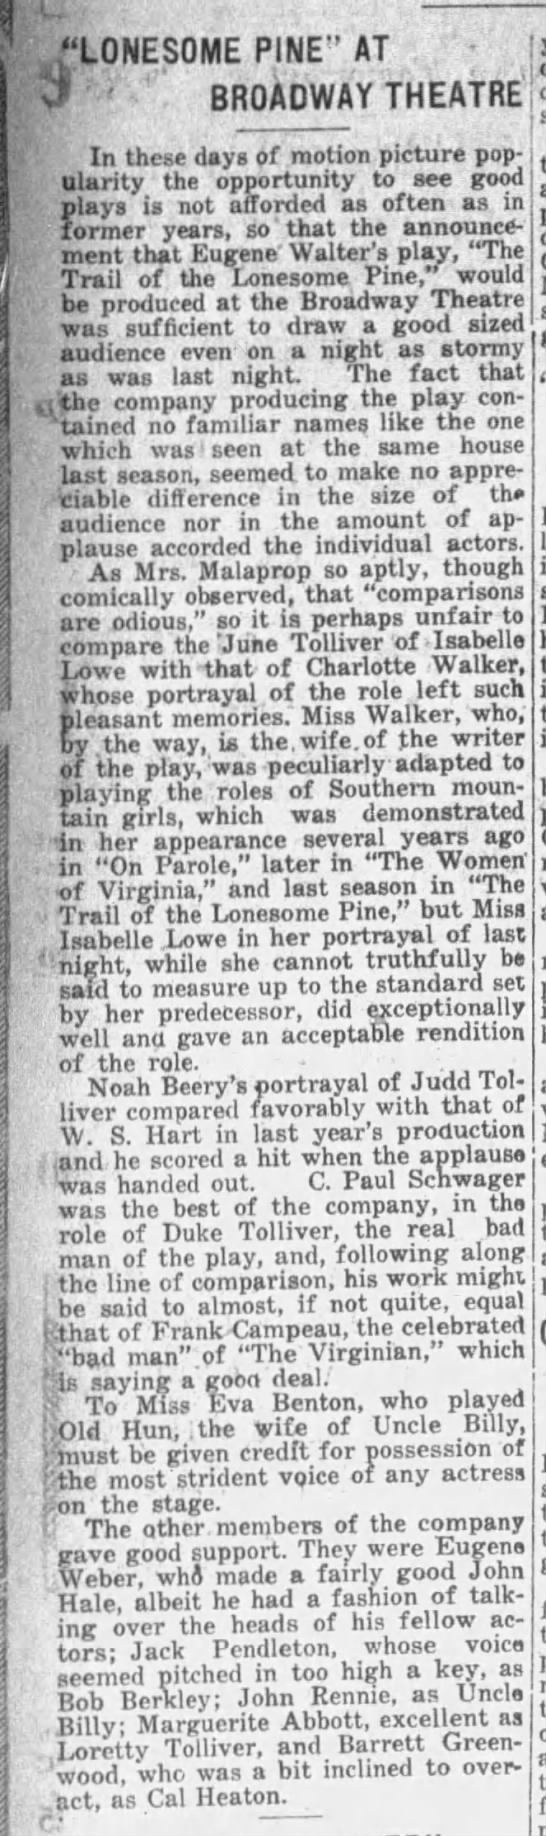 Noah Beery Senior's wife Marguerite had a role in the play "The Trail of the Lonesome Pine". - 